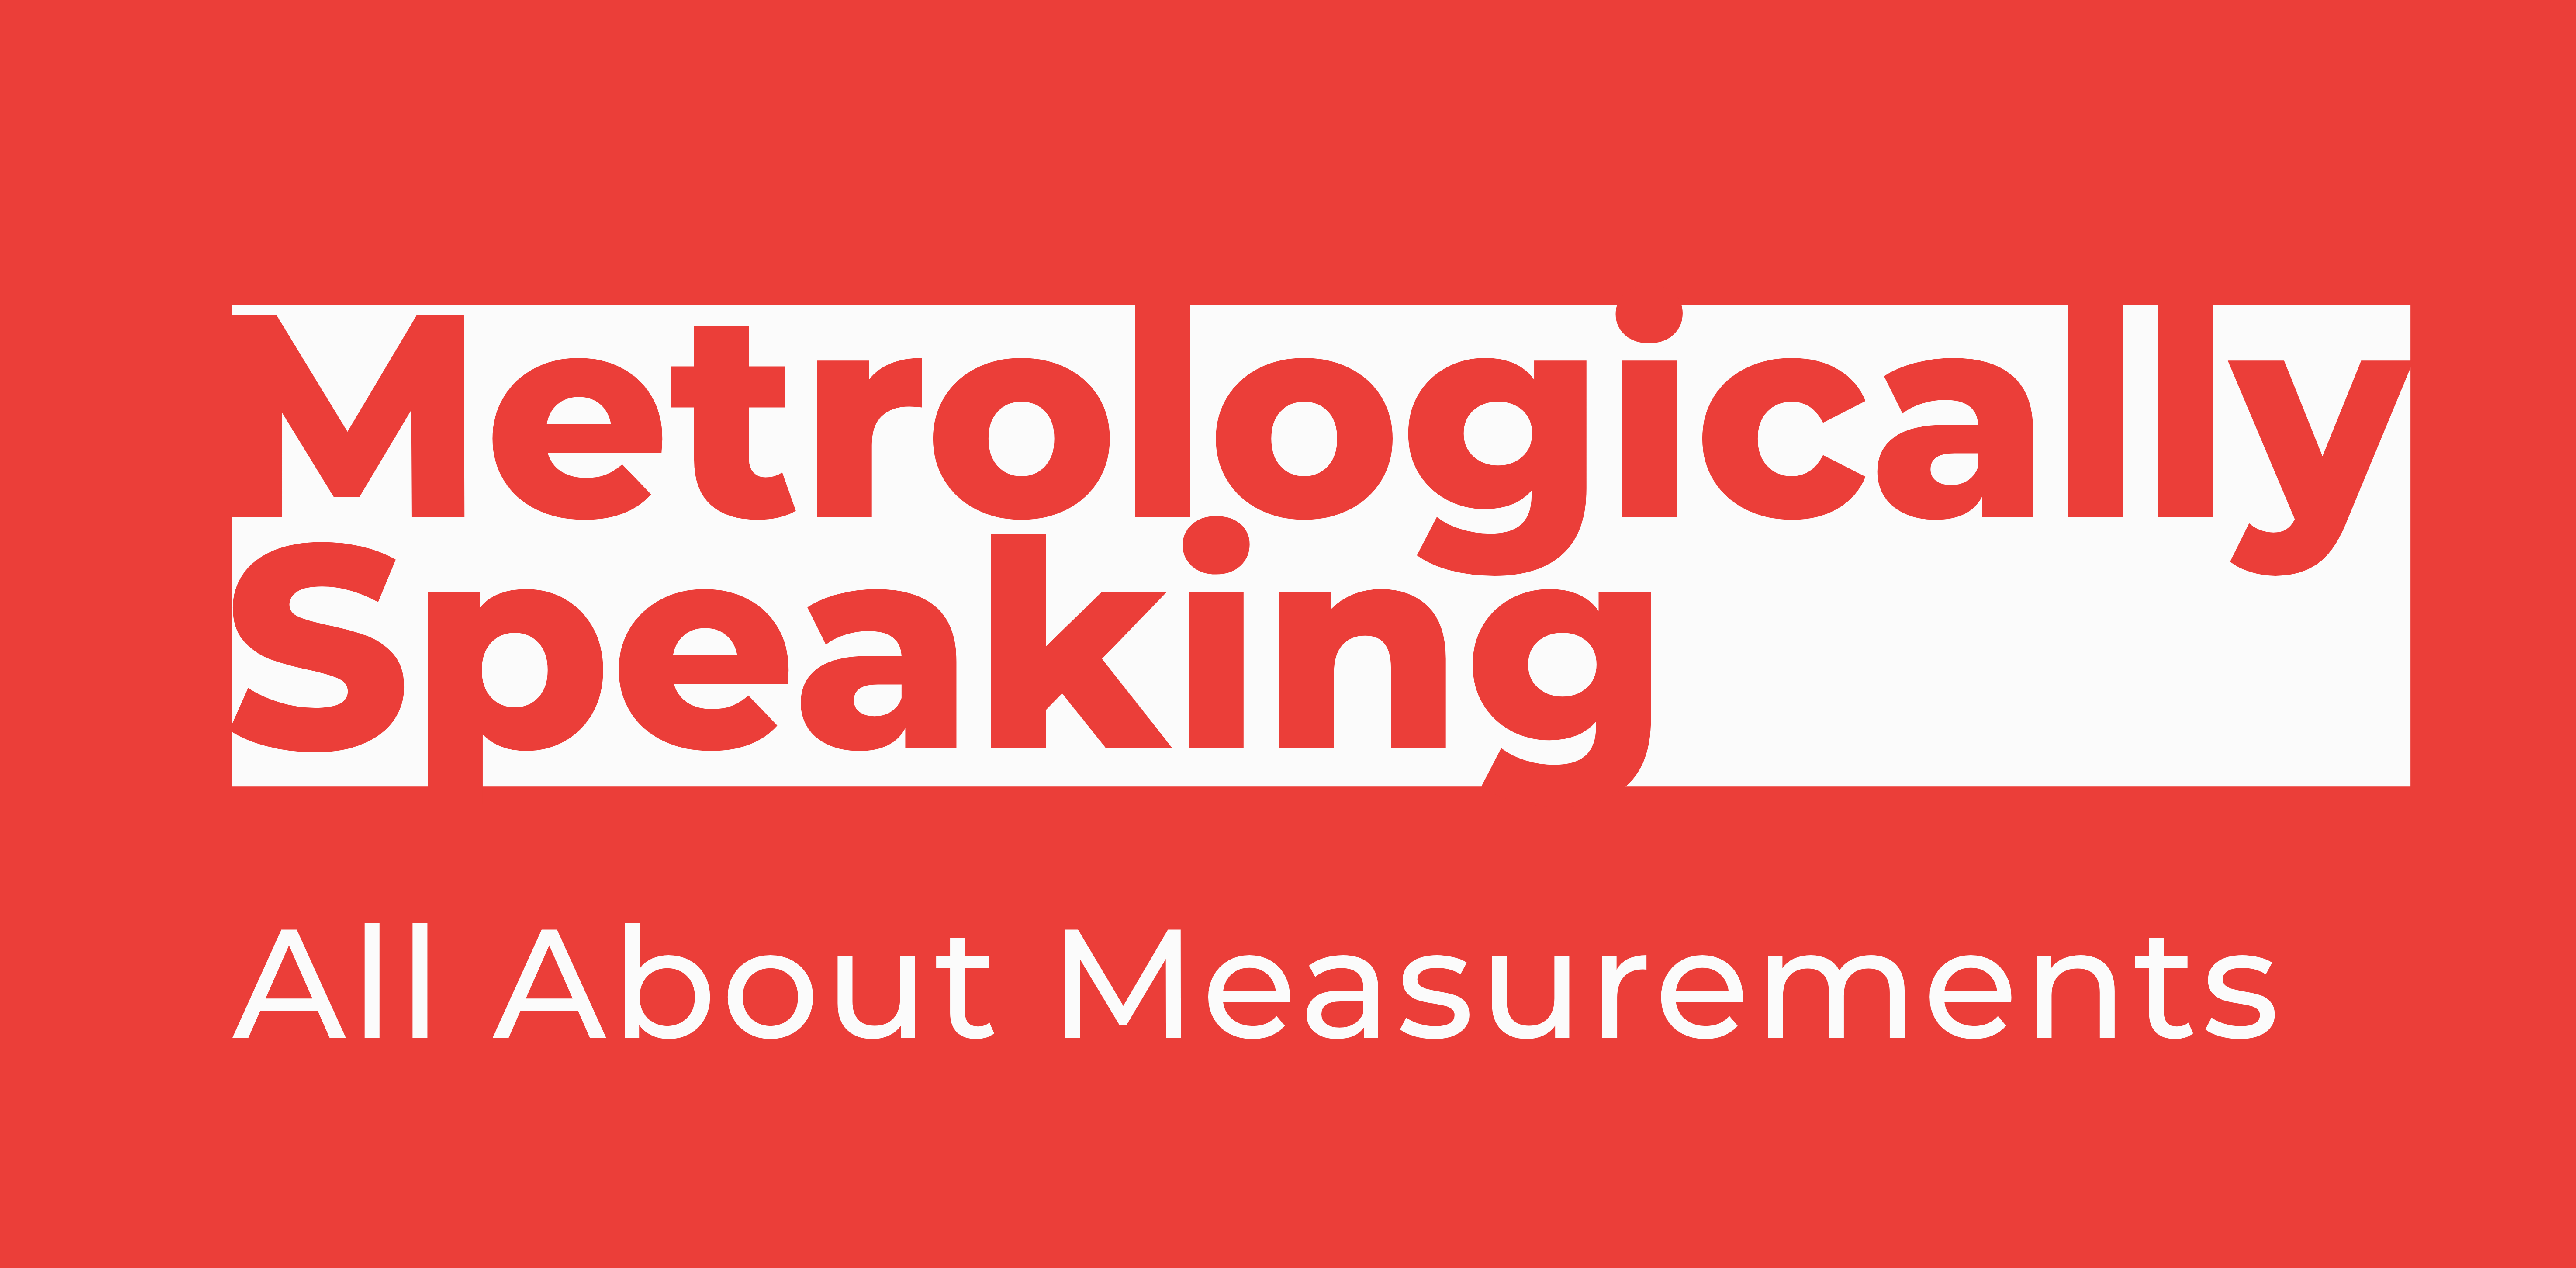 Everything About Metrology